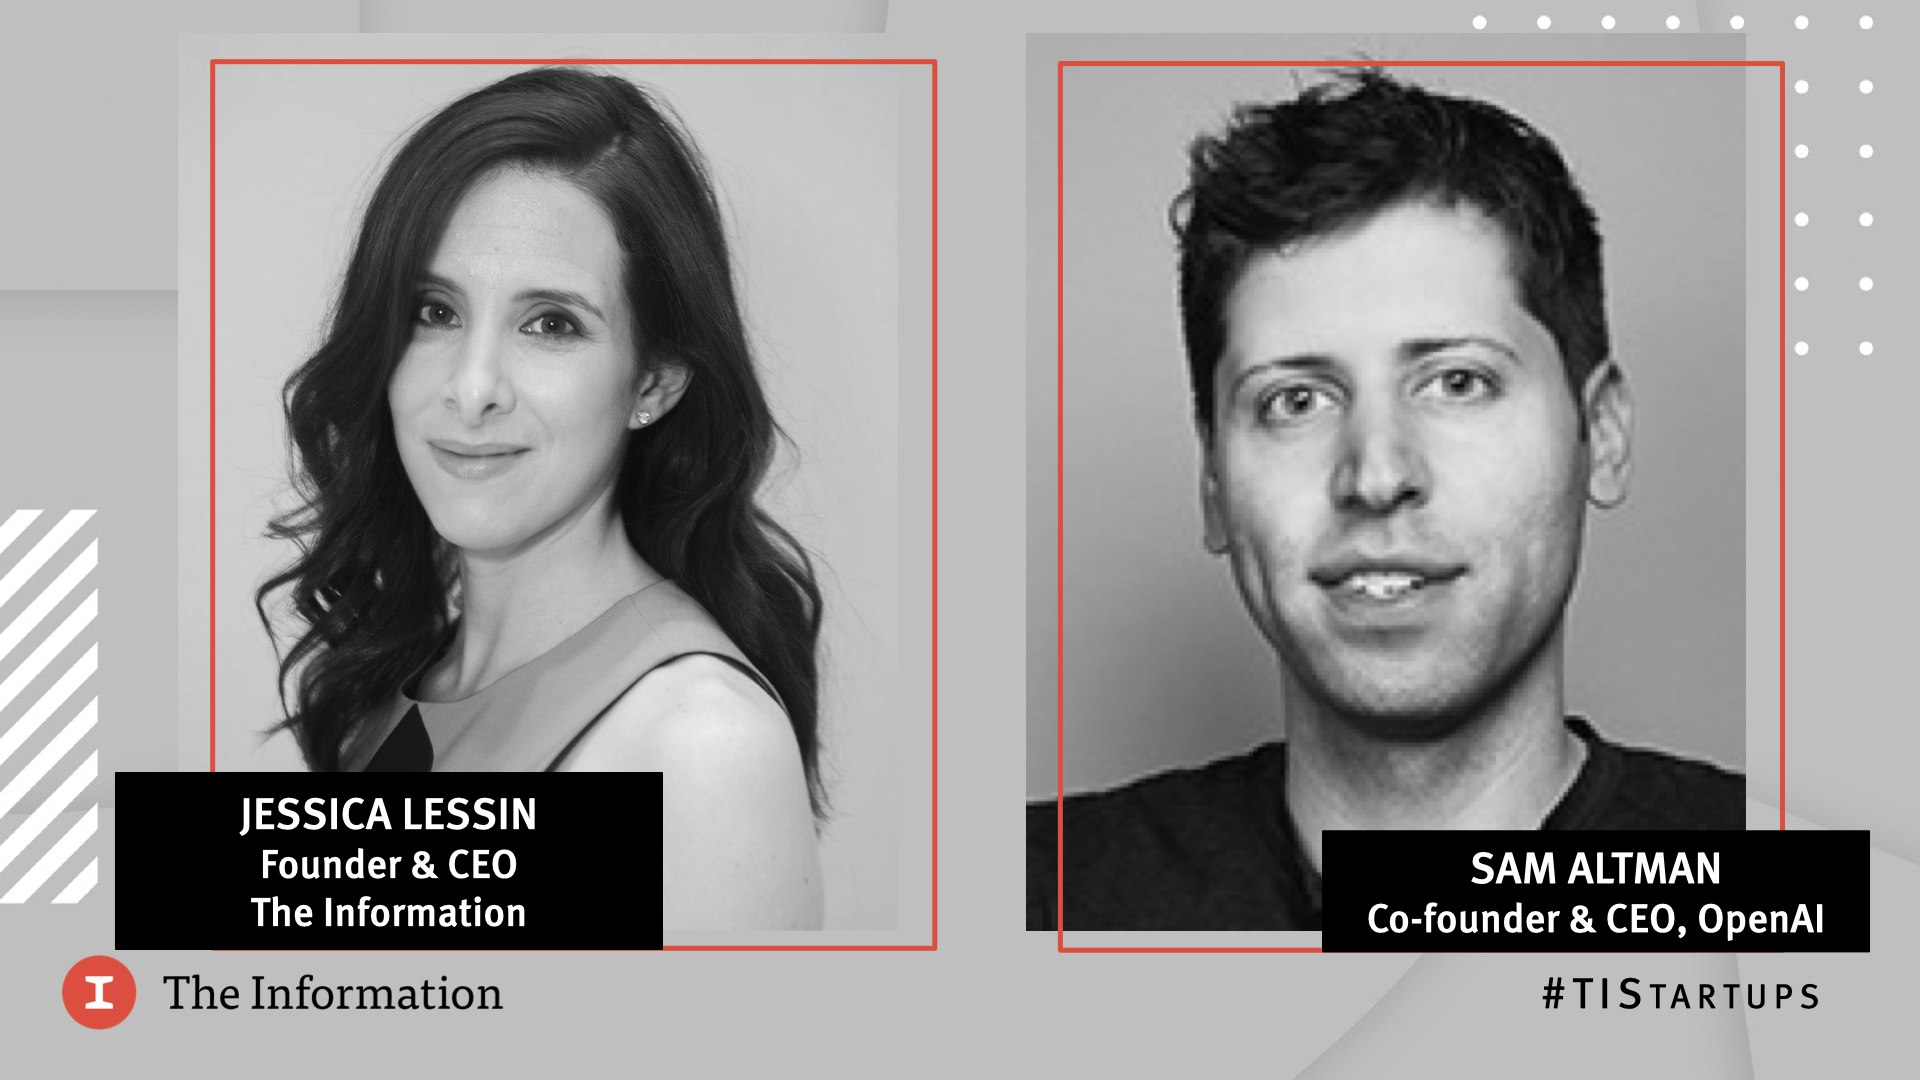 Future of Startups 2021 - Sam Altman, Co-founder & CEO, OpenAI, in conversation with Jessica Lessin, Founder & CEO, The Information